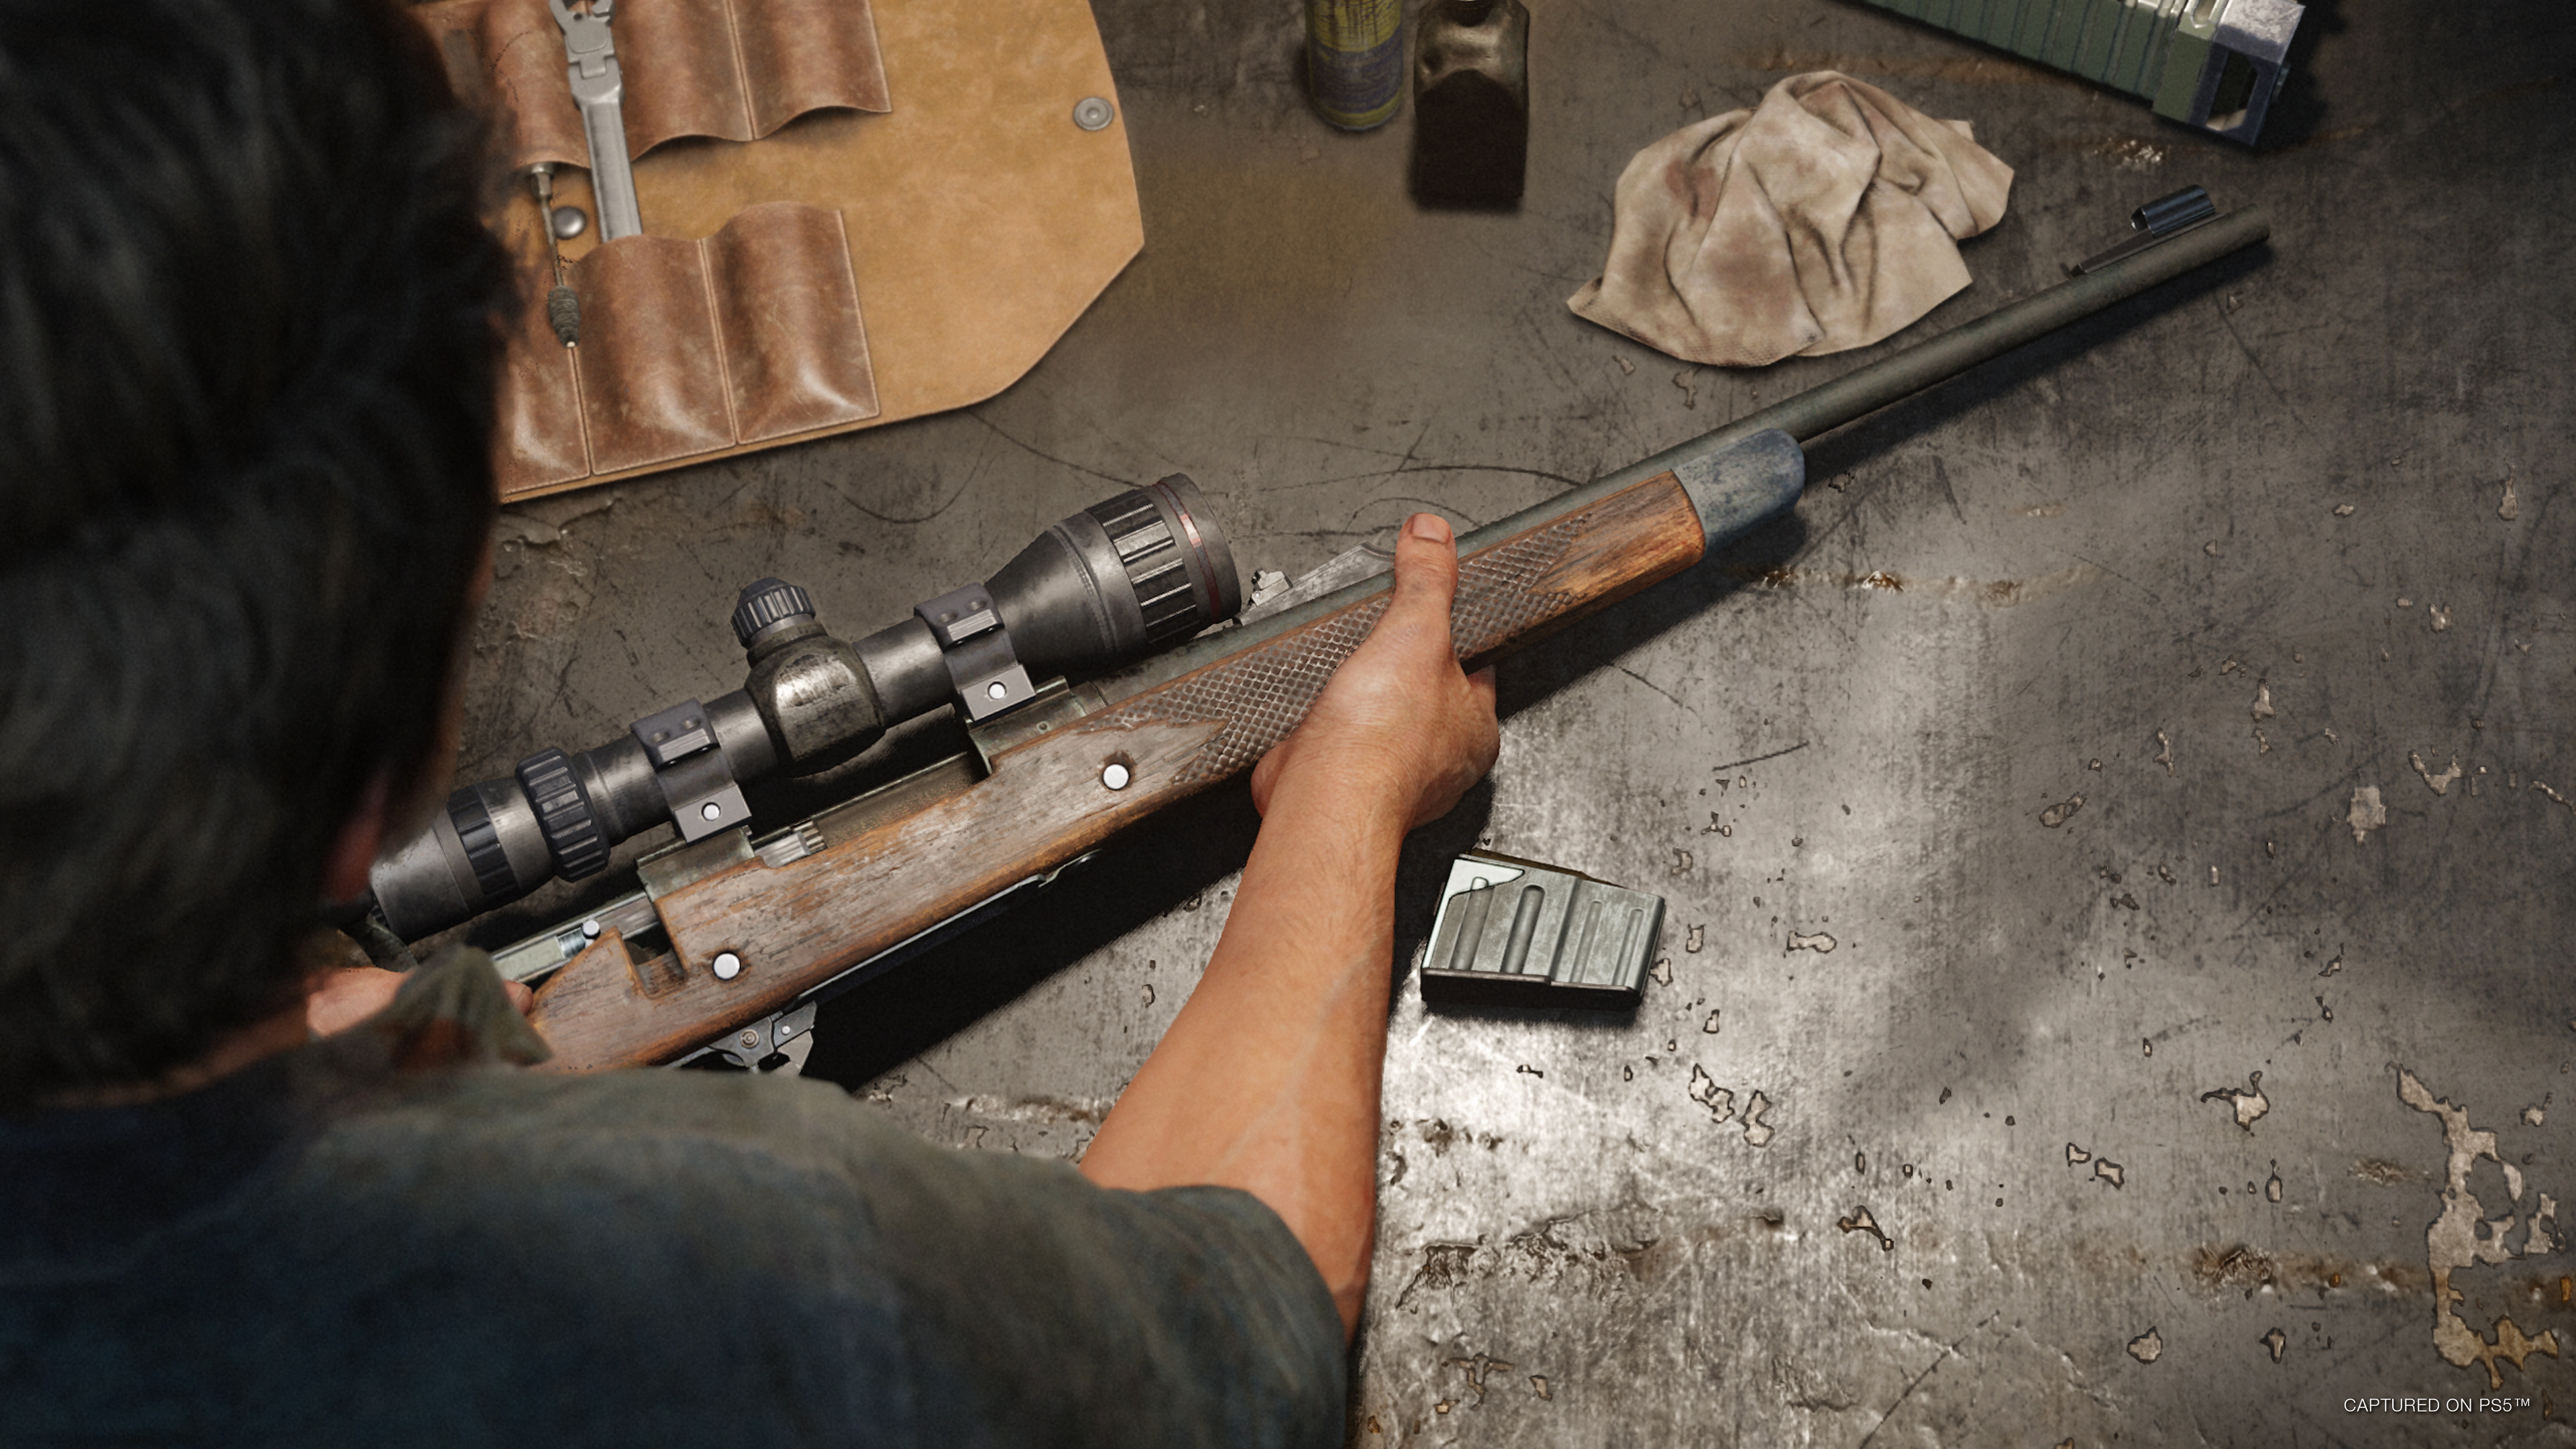 The Last of Us 2 weapons & holsters: Where to find them